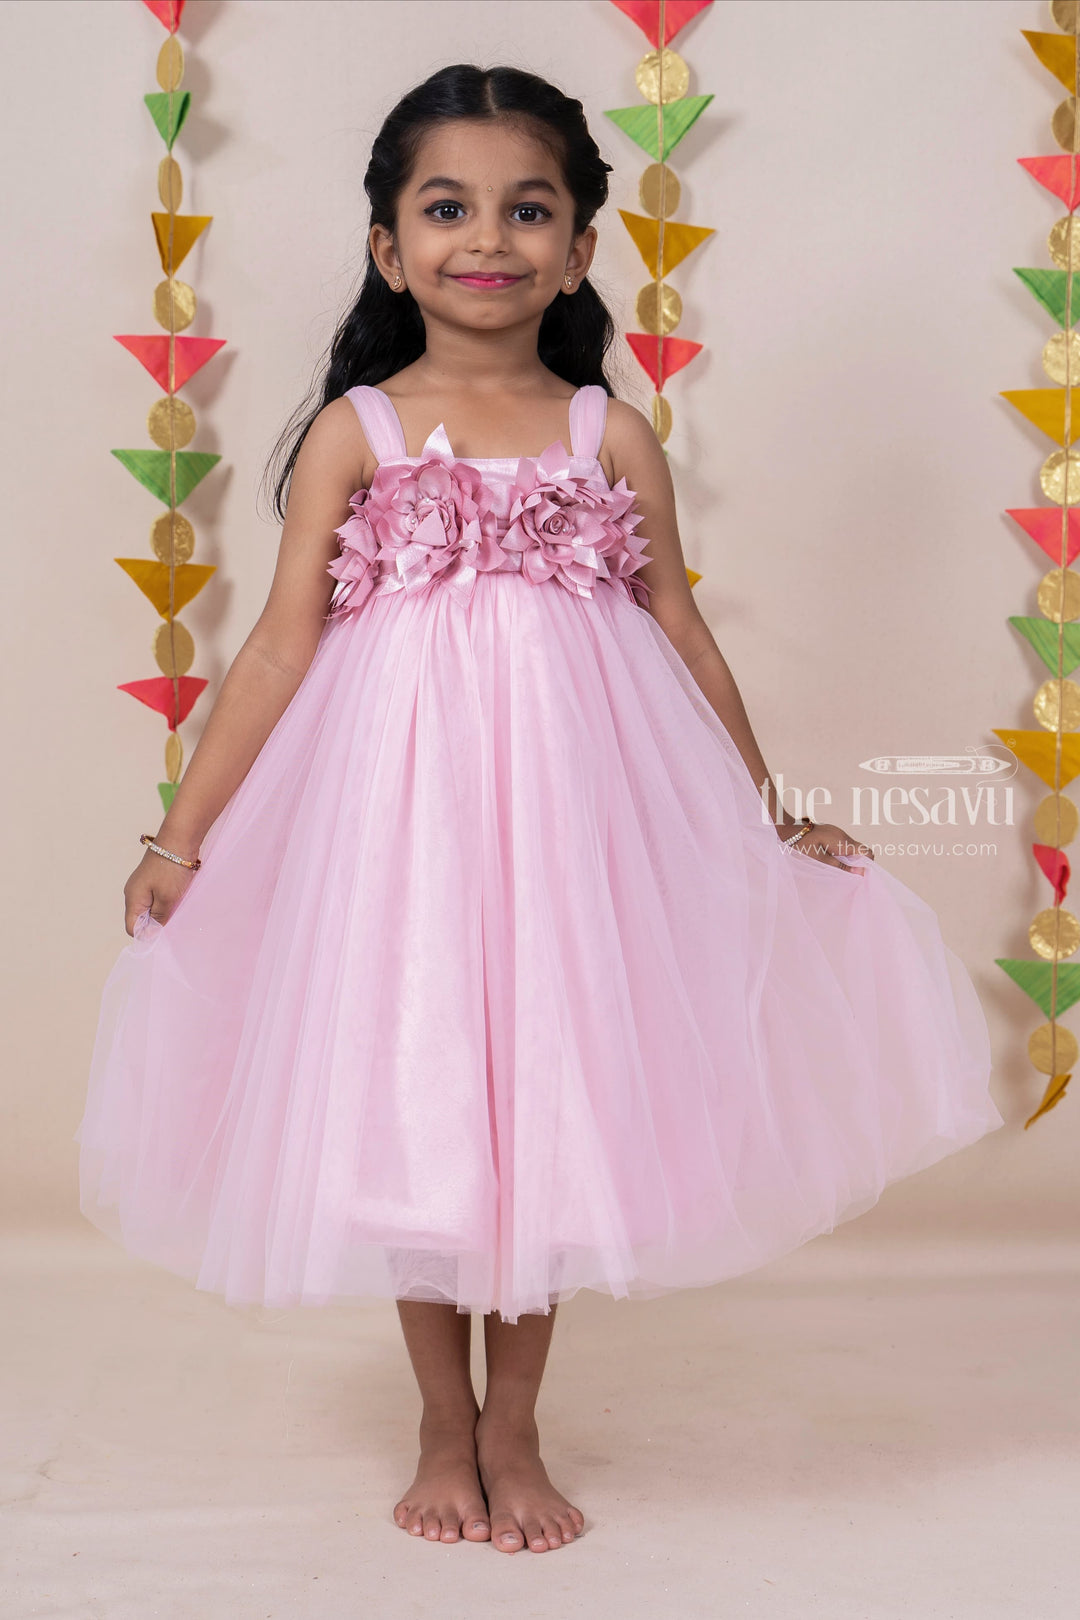 The Nesavu Party Frock Pastel Coral Pink Soft Net Party Wear For Baby Girls With Floral Embellishments psr silks Nesavu 24 (5Y) / rosybrown PF57A